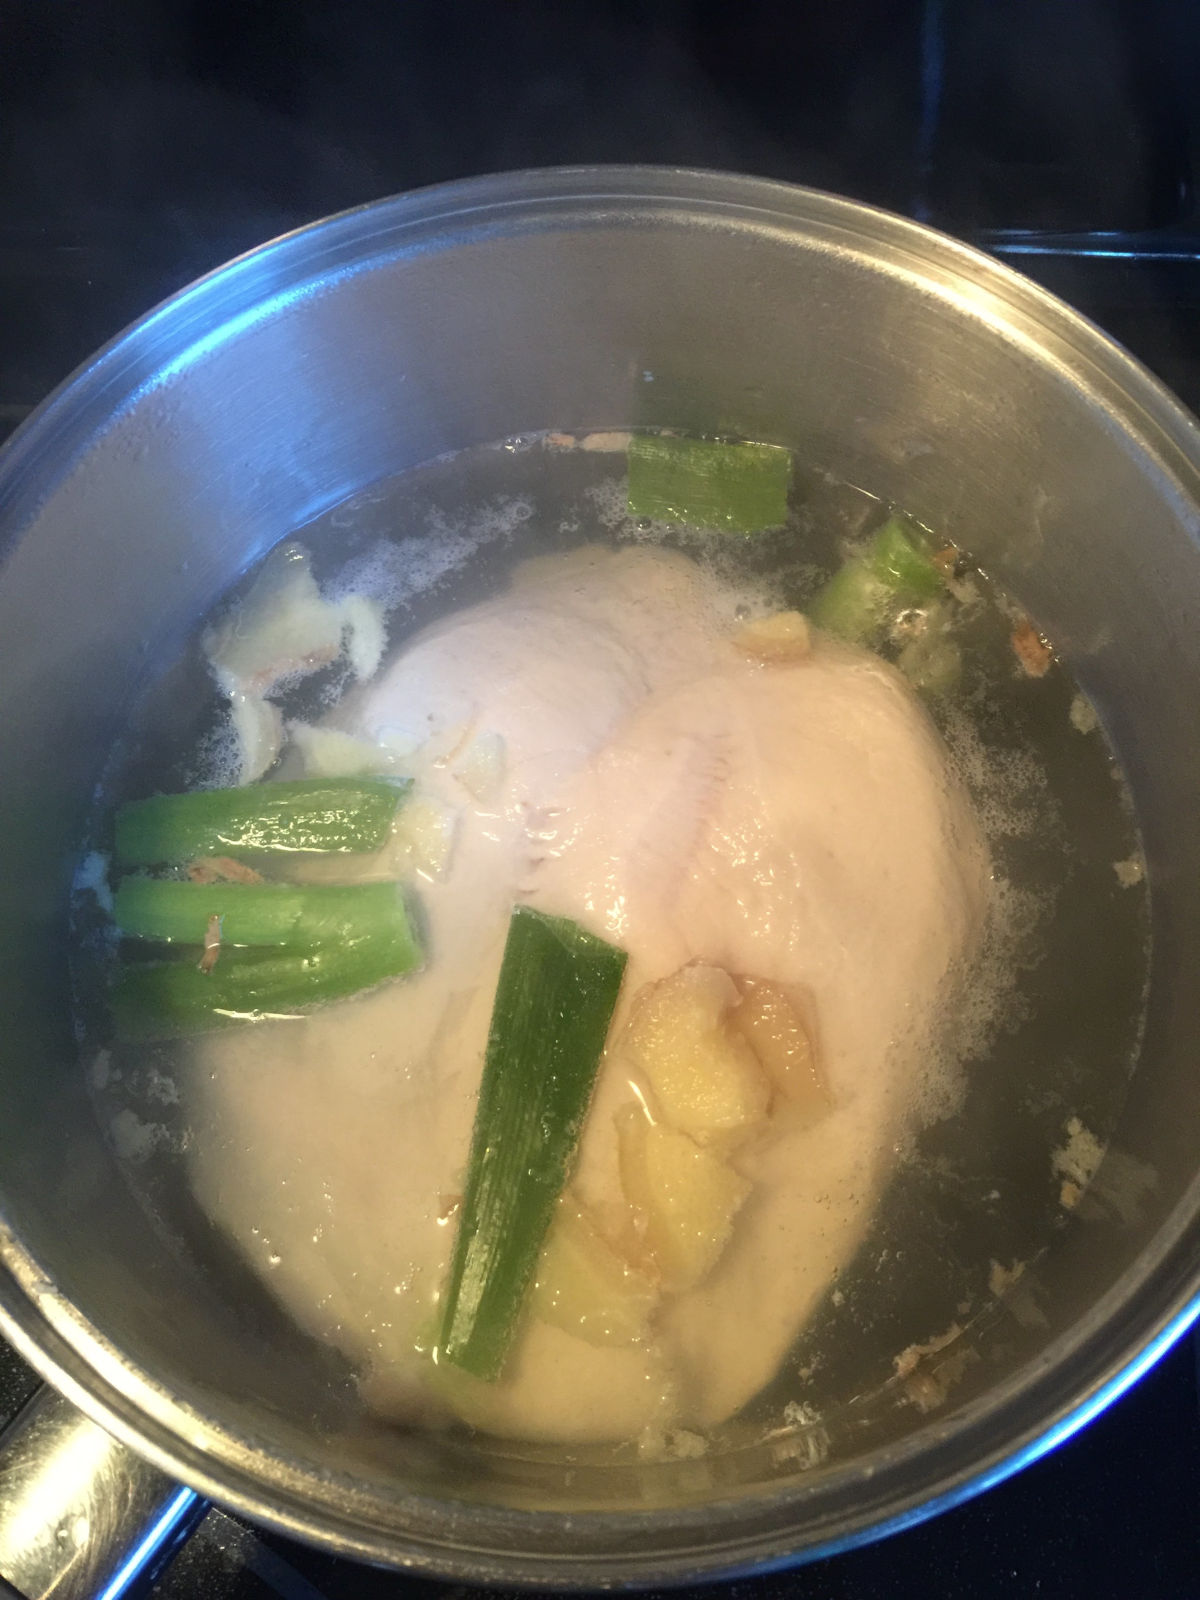 Chicken breast, green onion, slices of ginger in boiling water in pot.